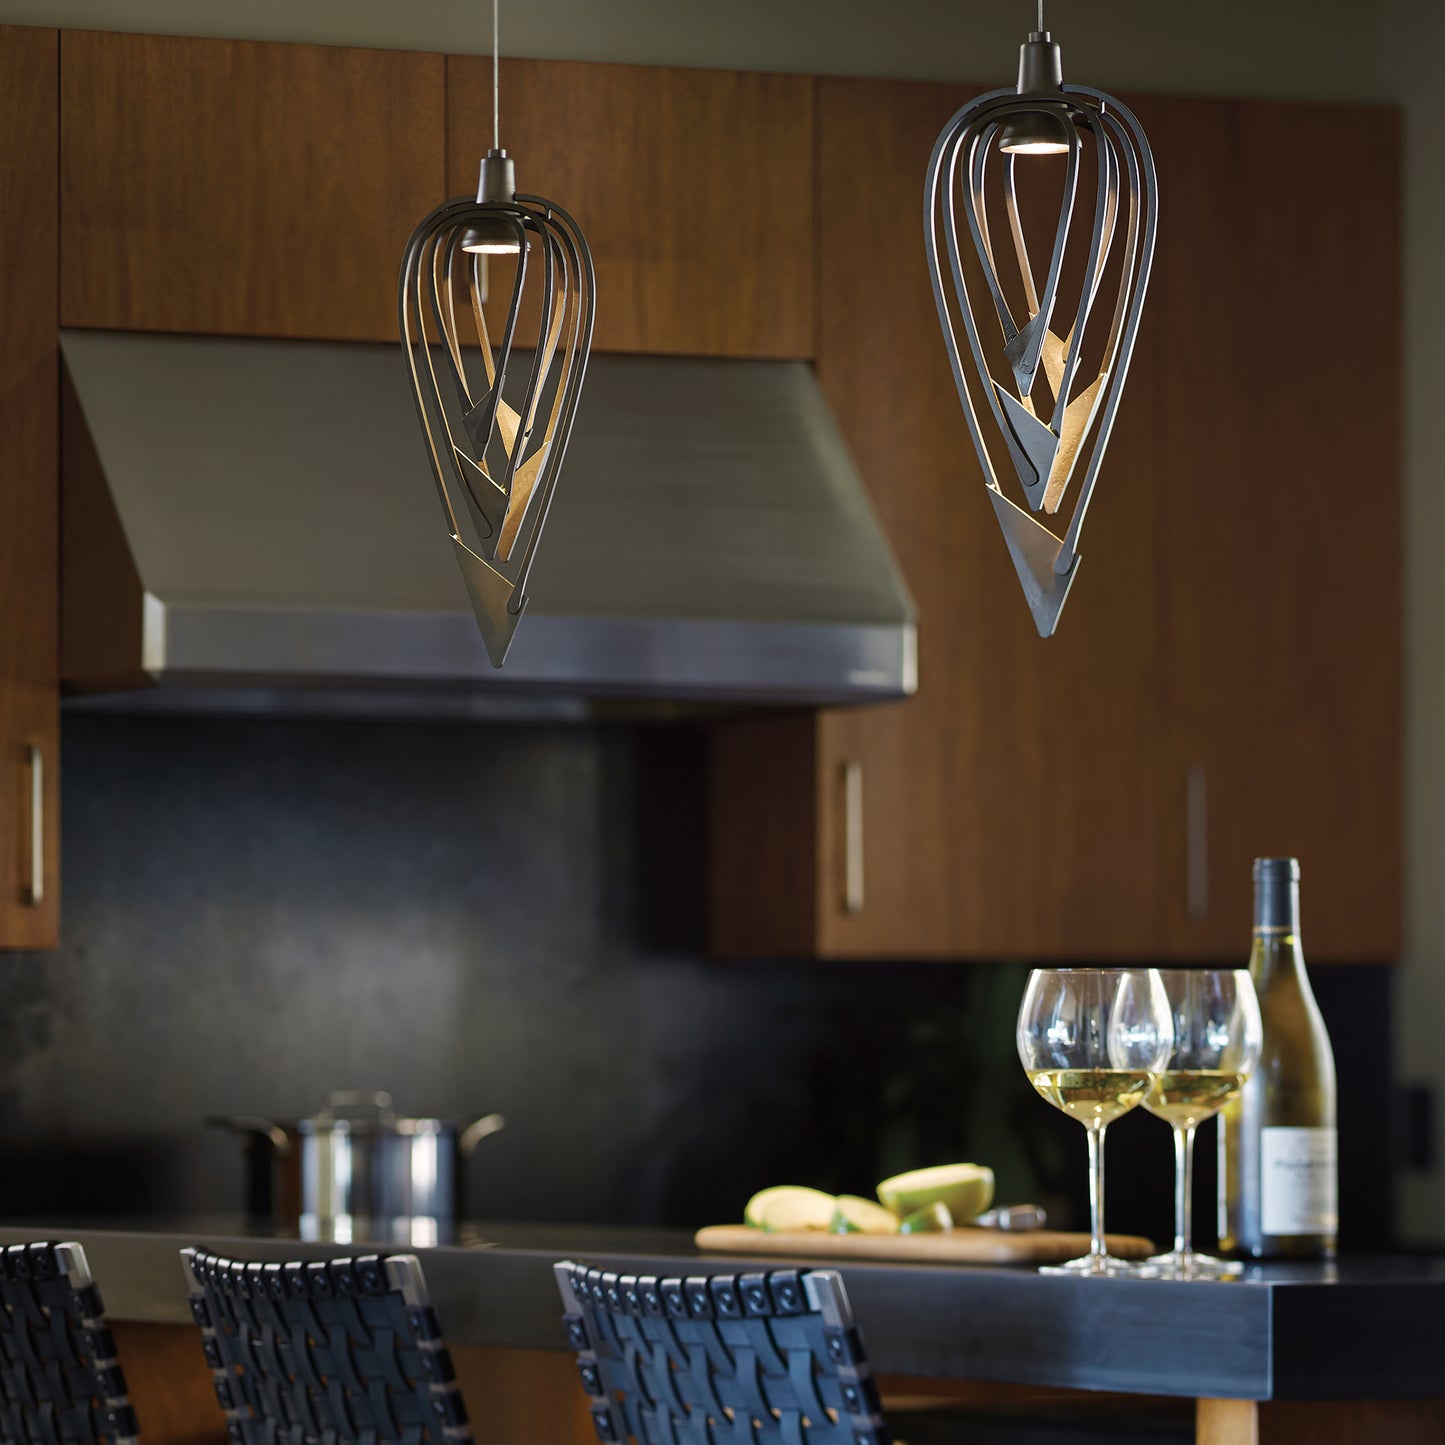 A kitchen with a wine glass hanging from a Hubbardton Forge Amulet Mini Pendant lighting fixture.